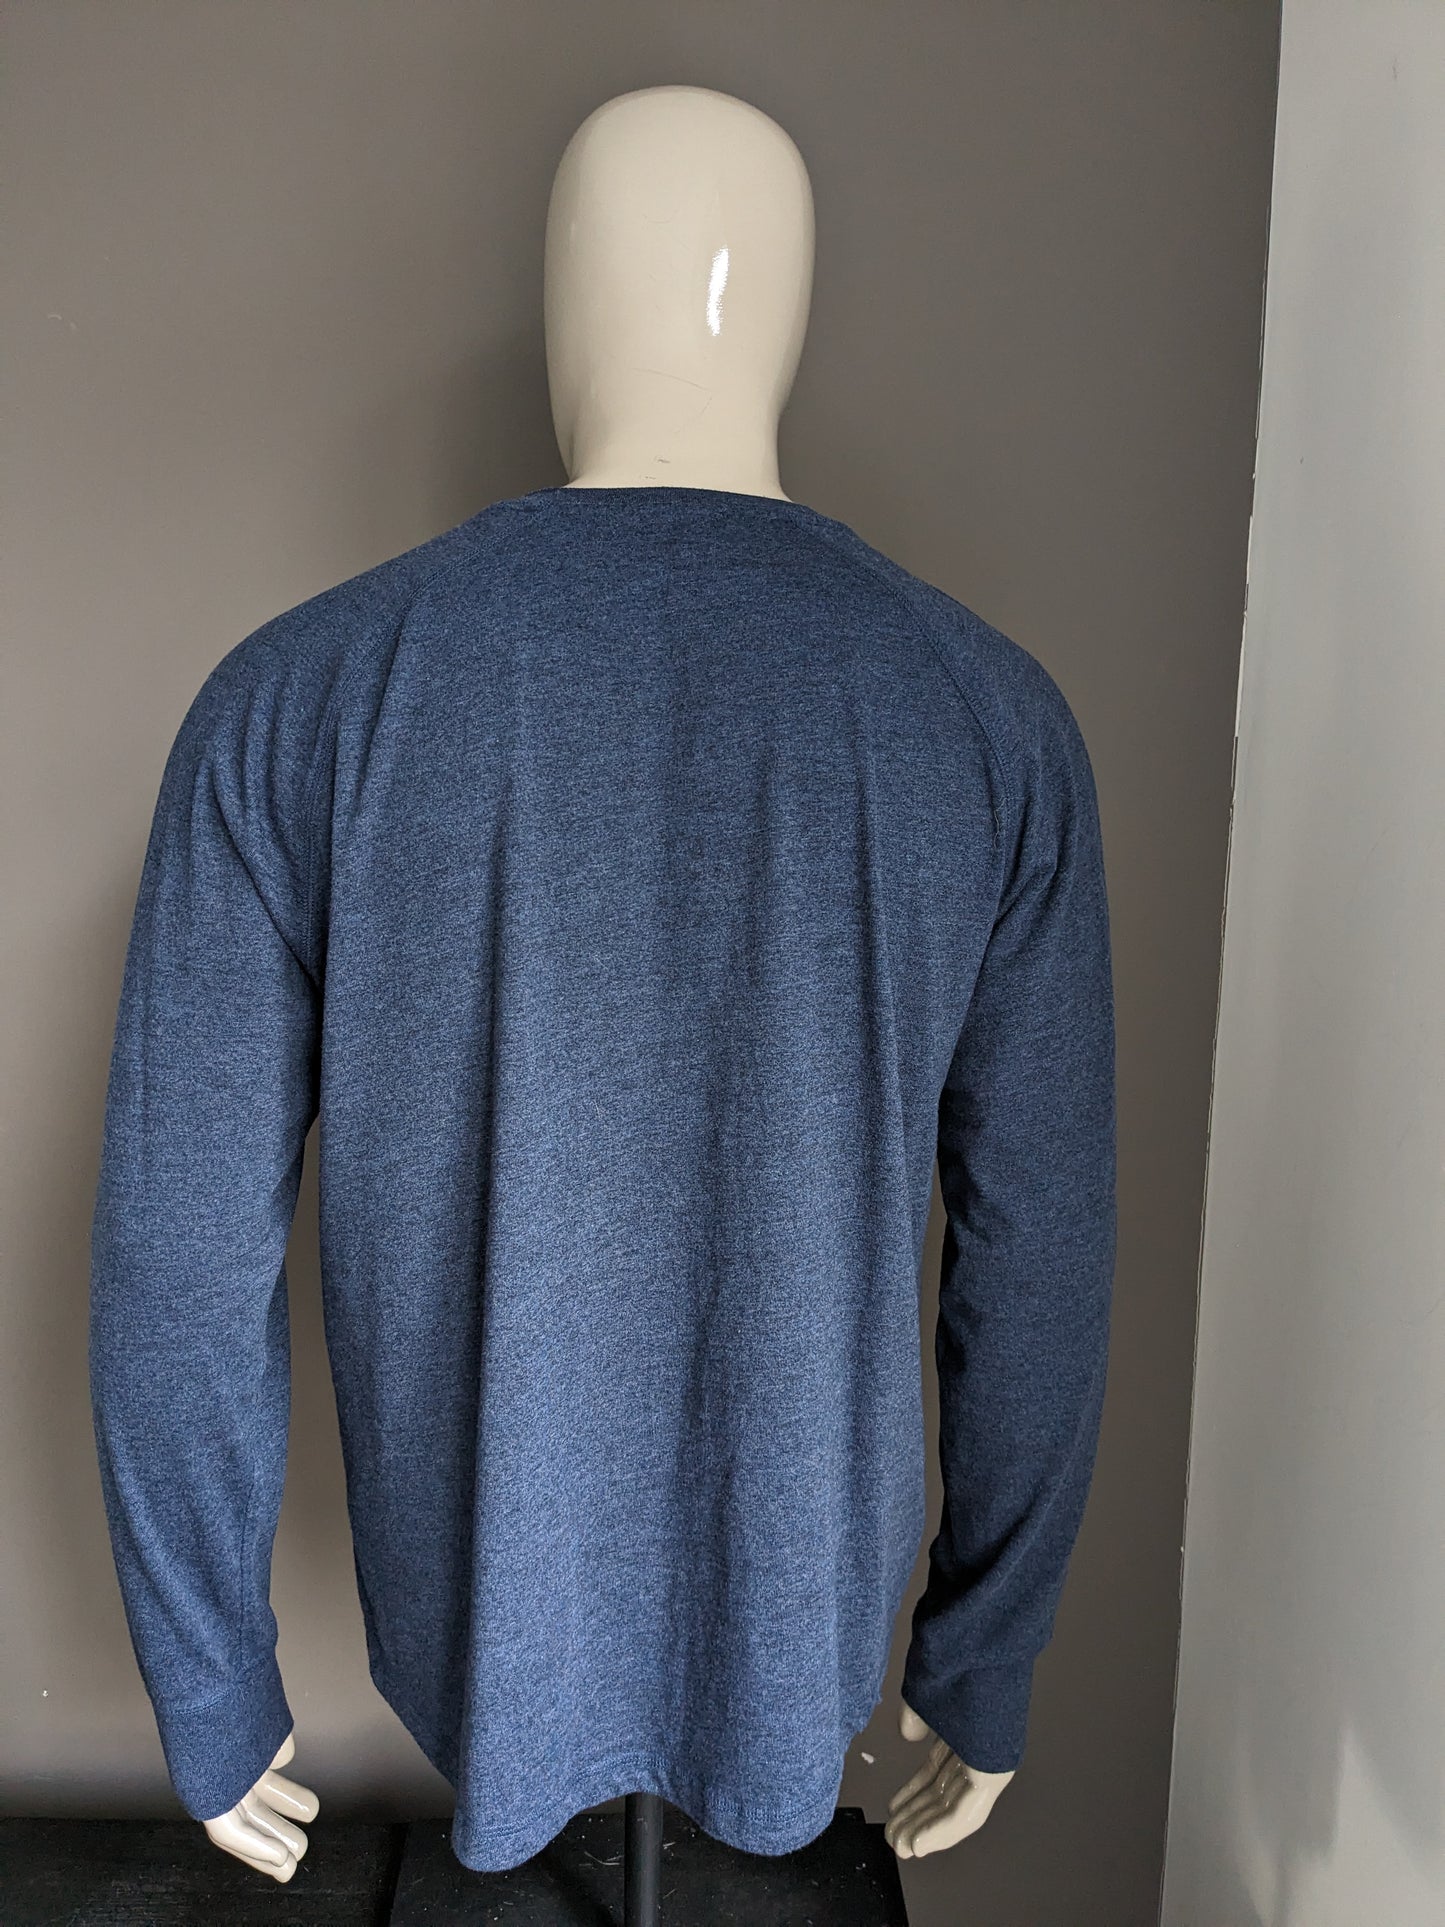 Gap Longsleeve with buttons. Blue black mixed. Size XL. Stretch.